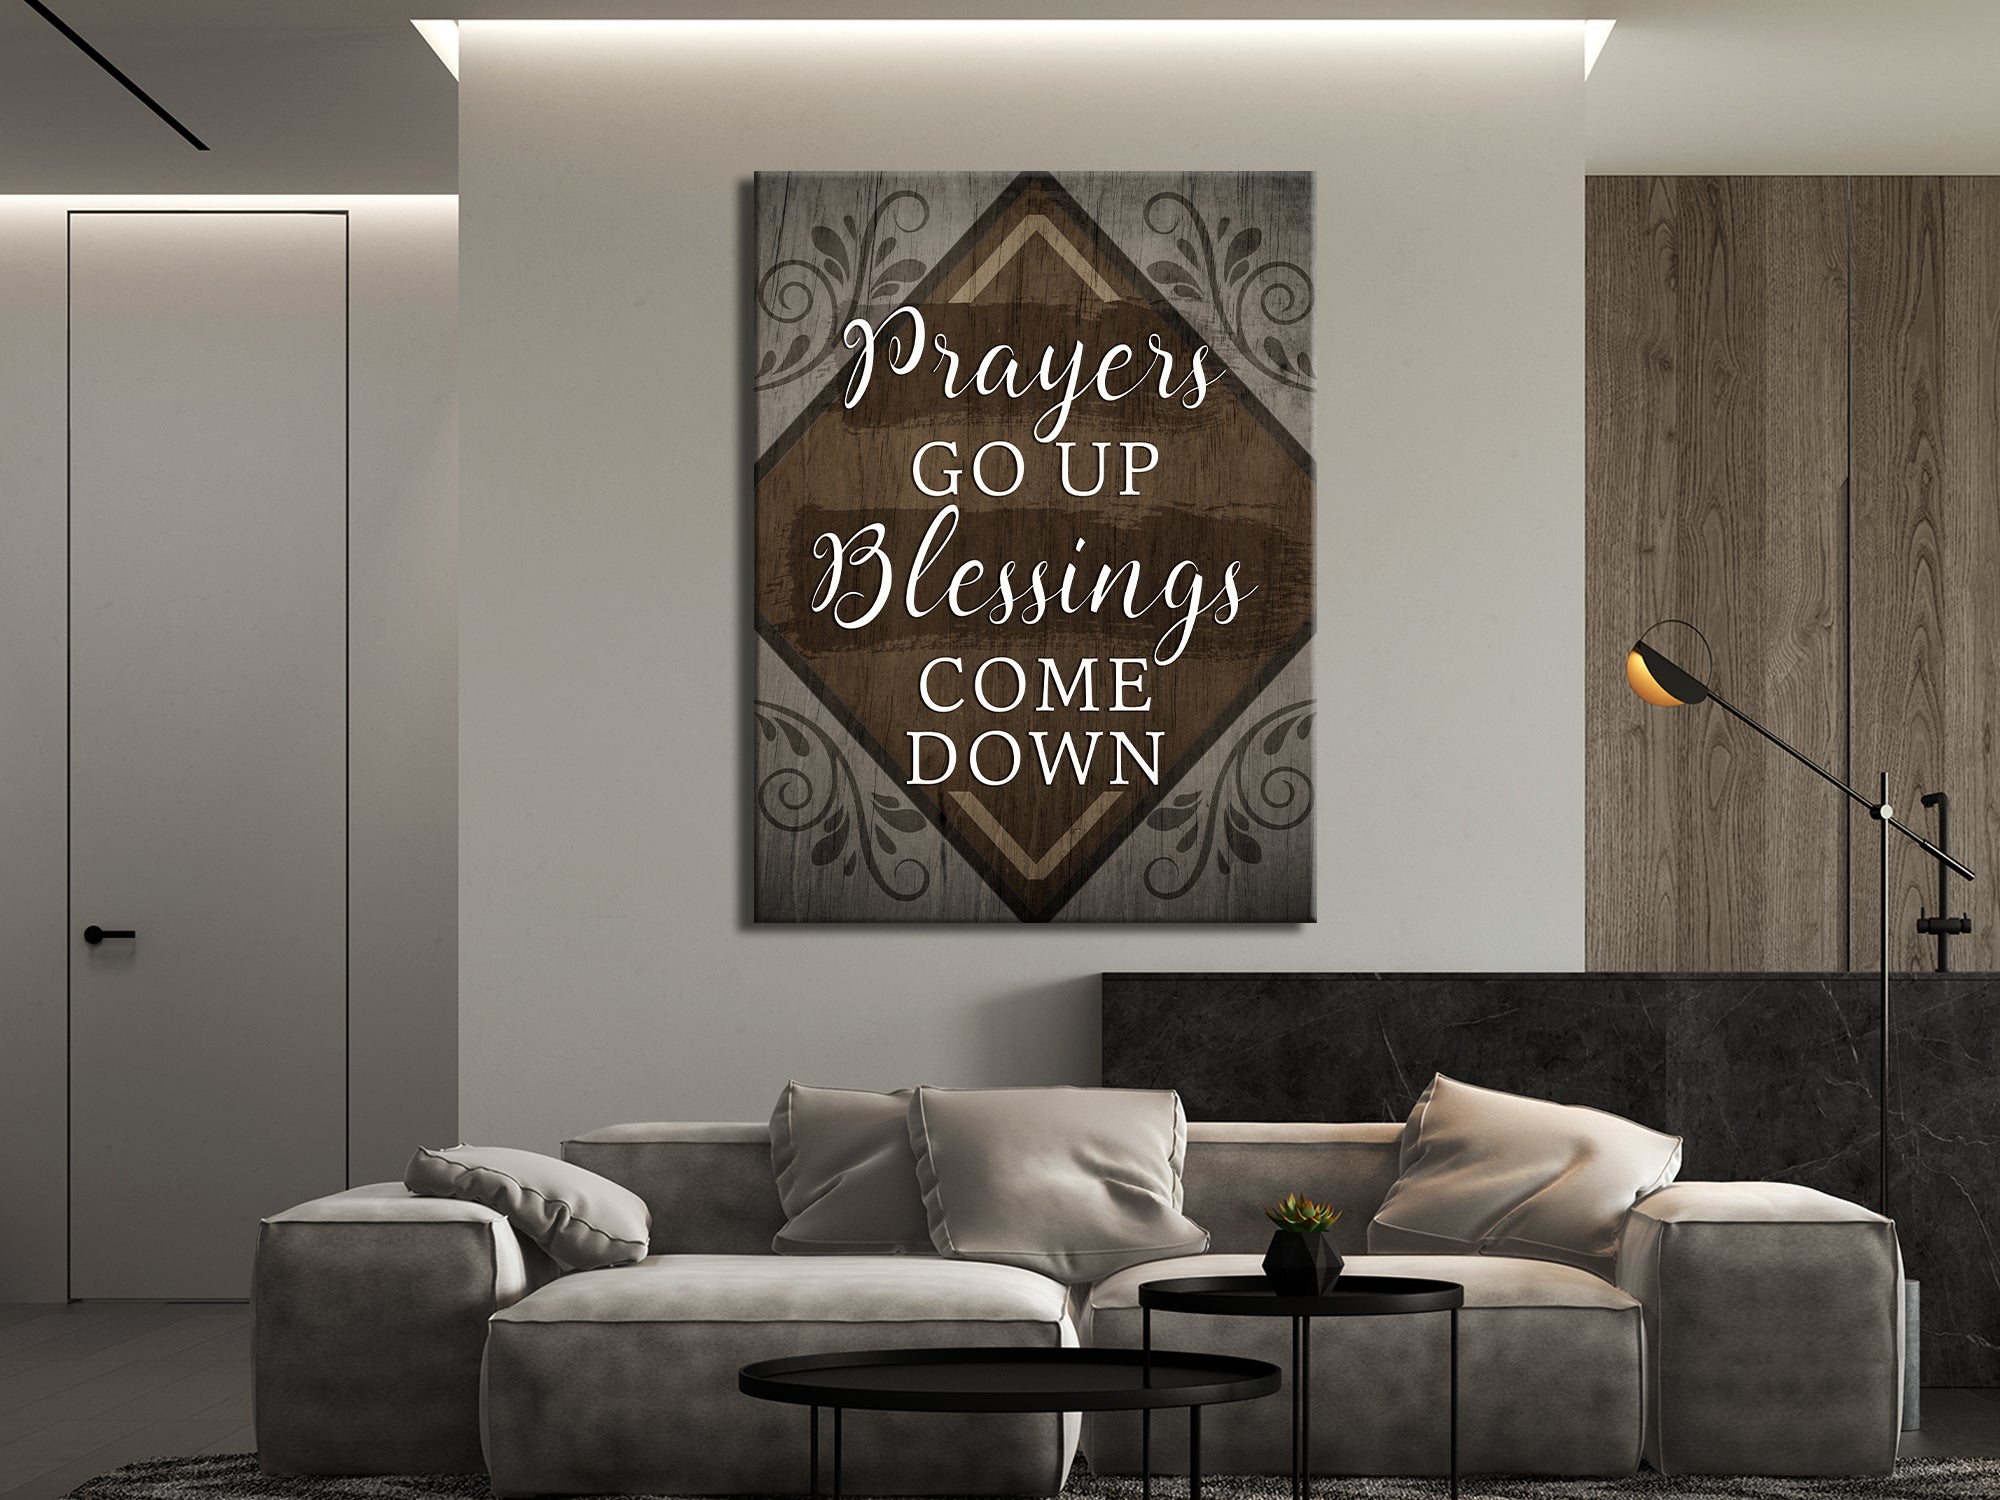 Prayers Up Blessings Down - Christian - Canvas Wall Art